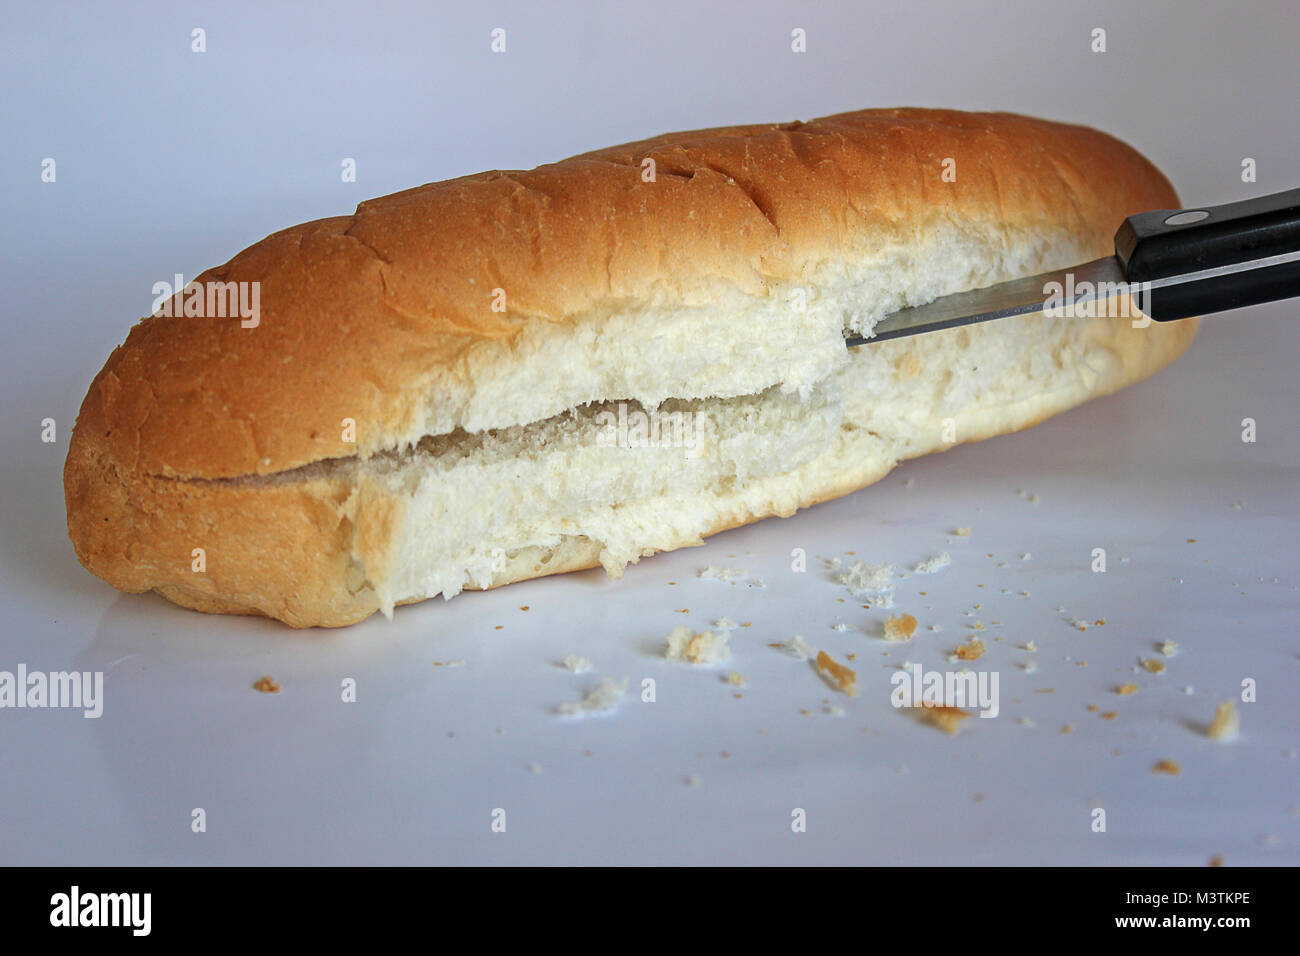 Hot dog bun or small piece of bread being cut with bread knife on clear background with crumbs lying in front Stock Photo